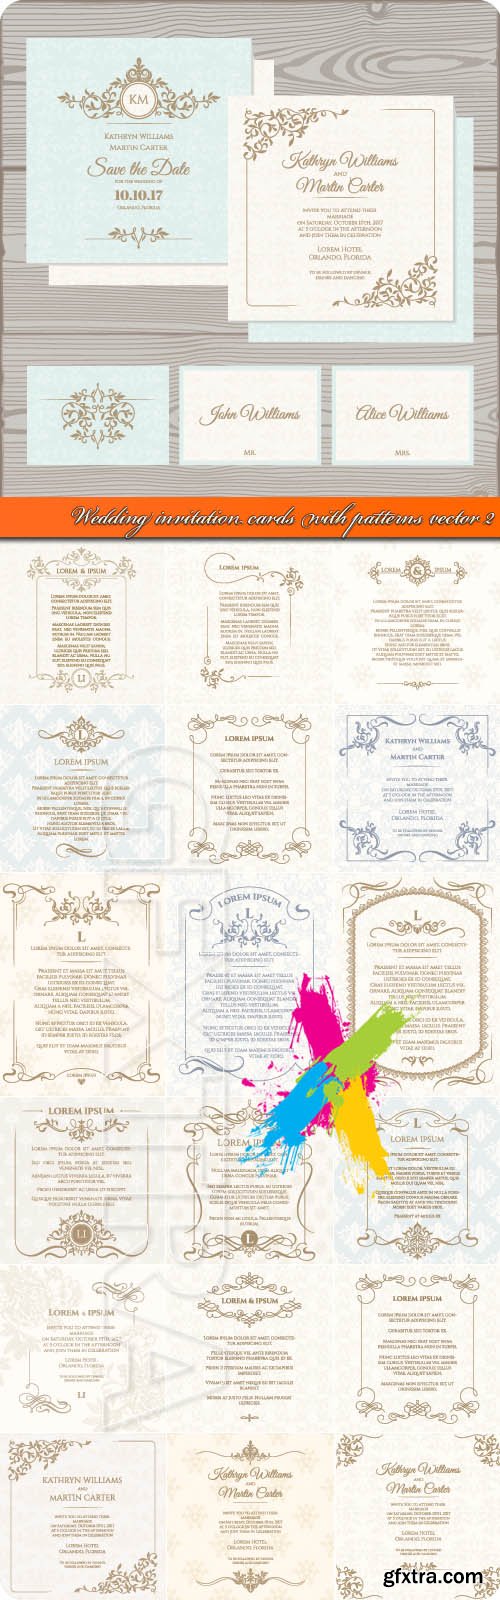 Wedding invitation cards with patterns vector 2